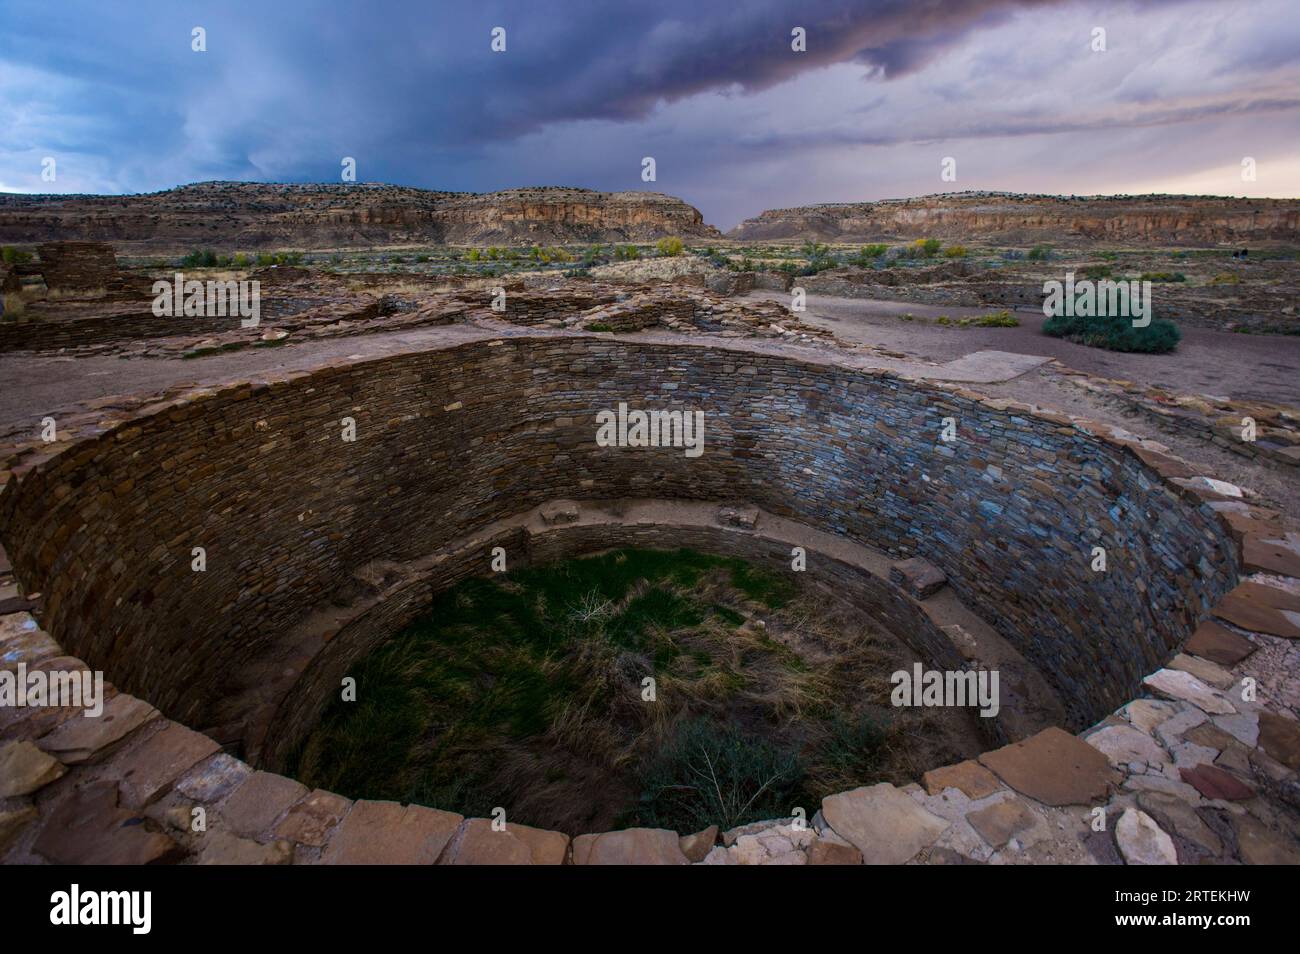 Pueblo Bonito at dusk, Chaco Culture National Historical Park, New Mexico, USA; New Mexico, United States of America Stock Photo